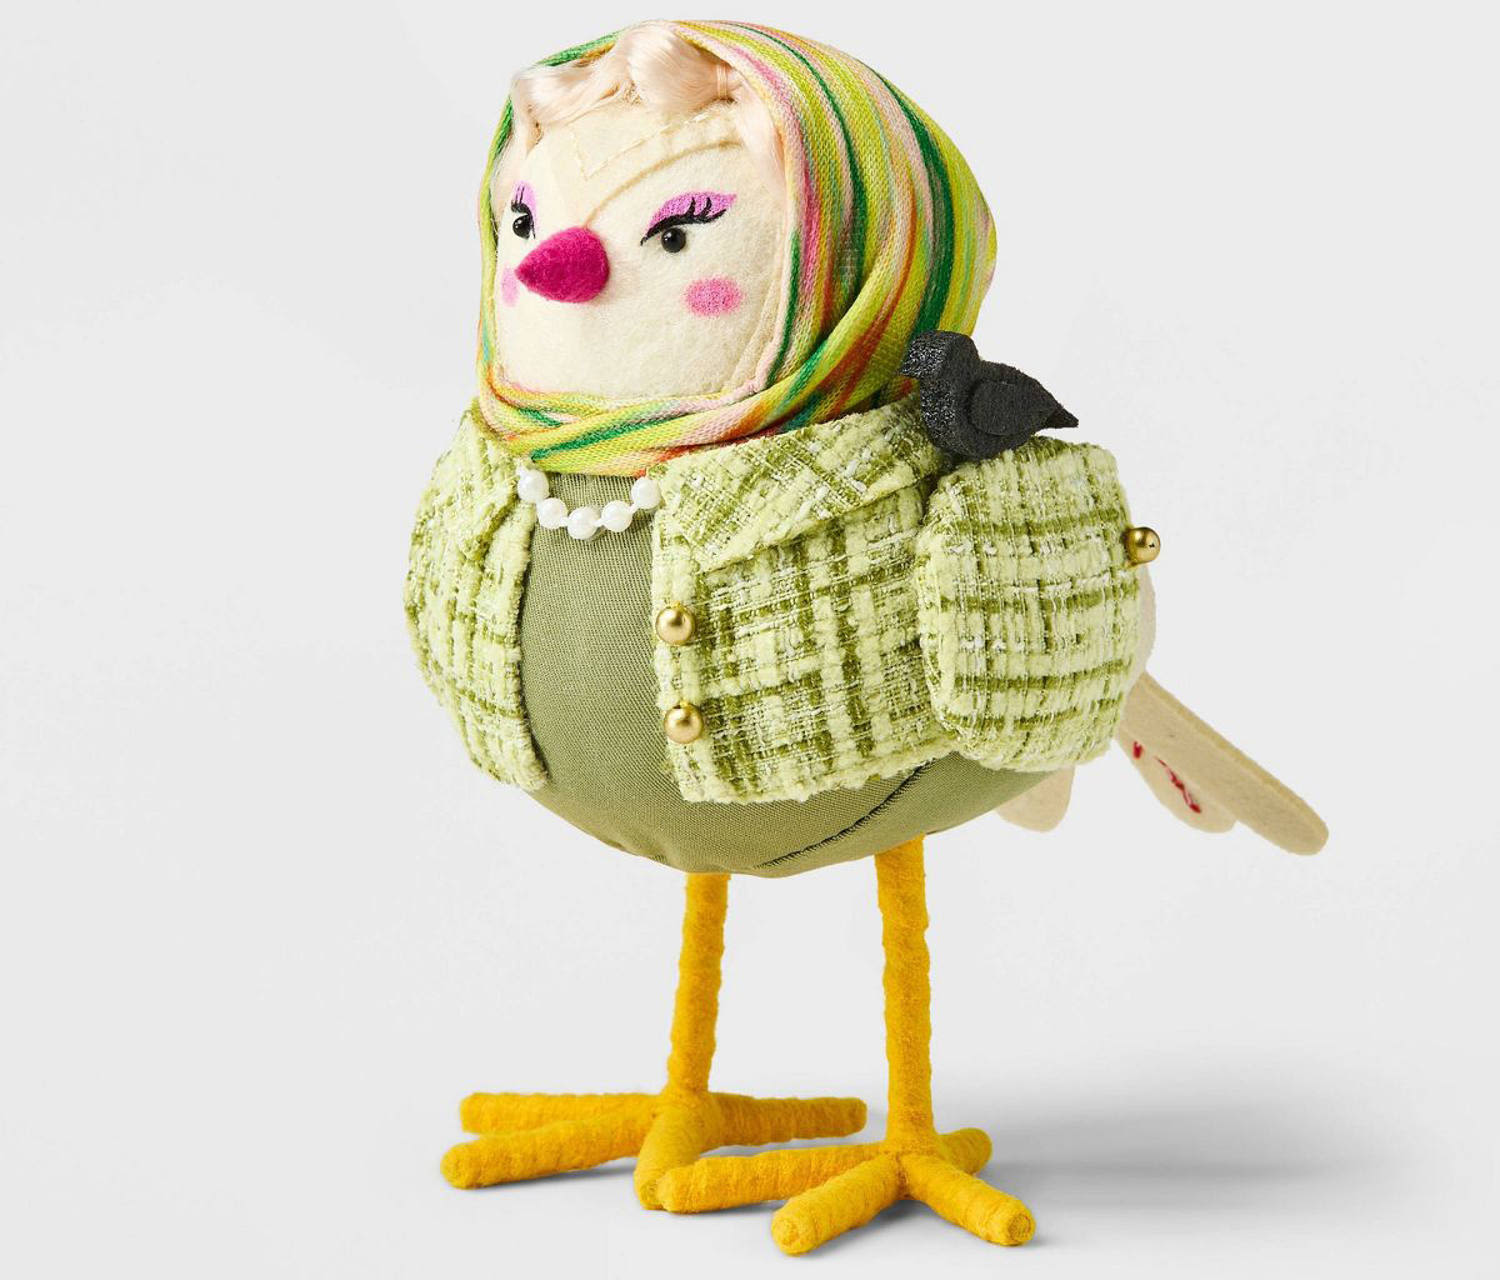 Target's Pride collection features a Hitchcock-inspired bird figurine that appears to be selling out